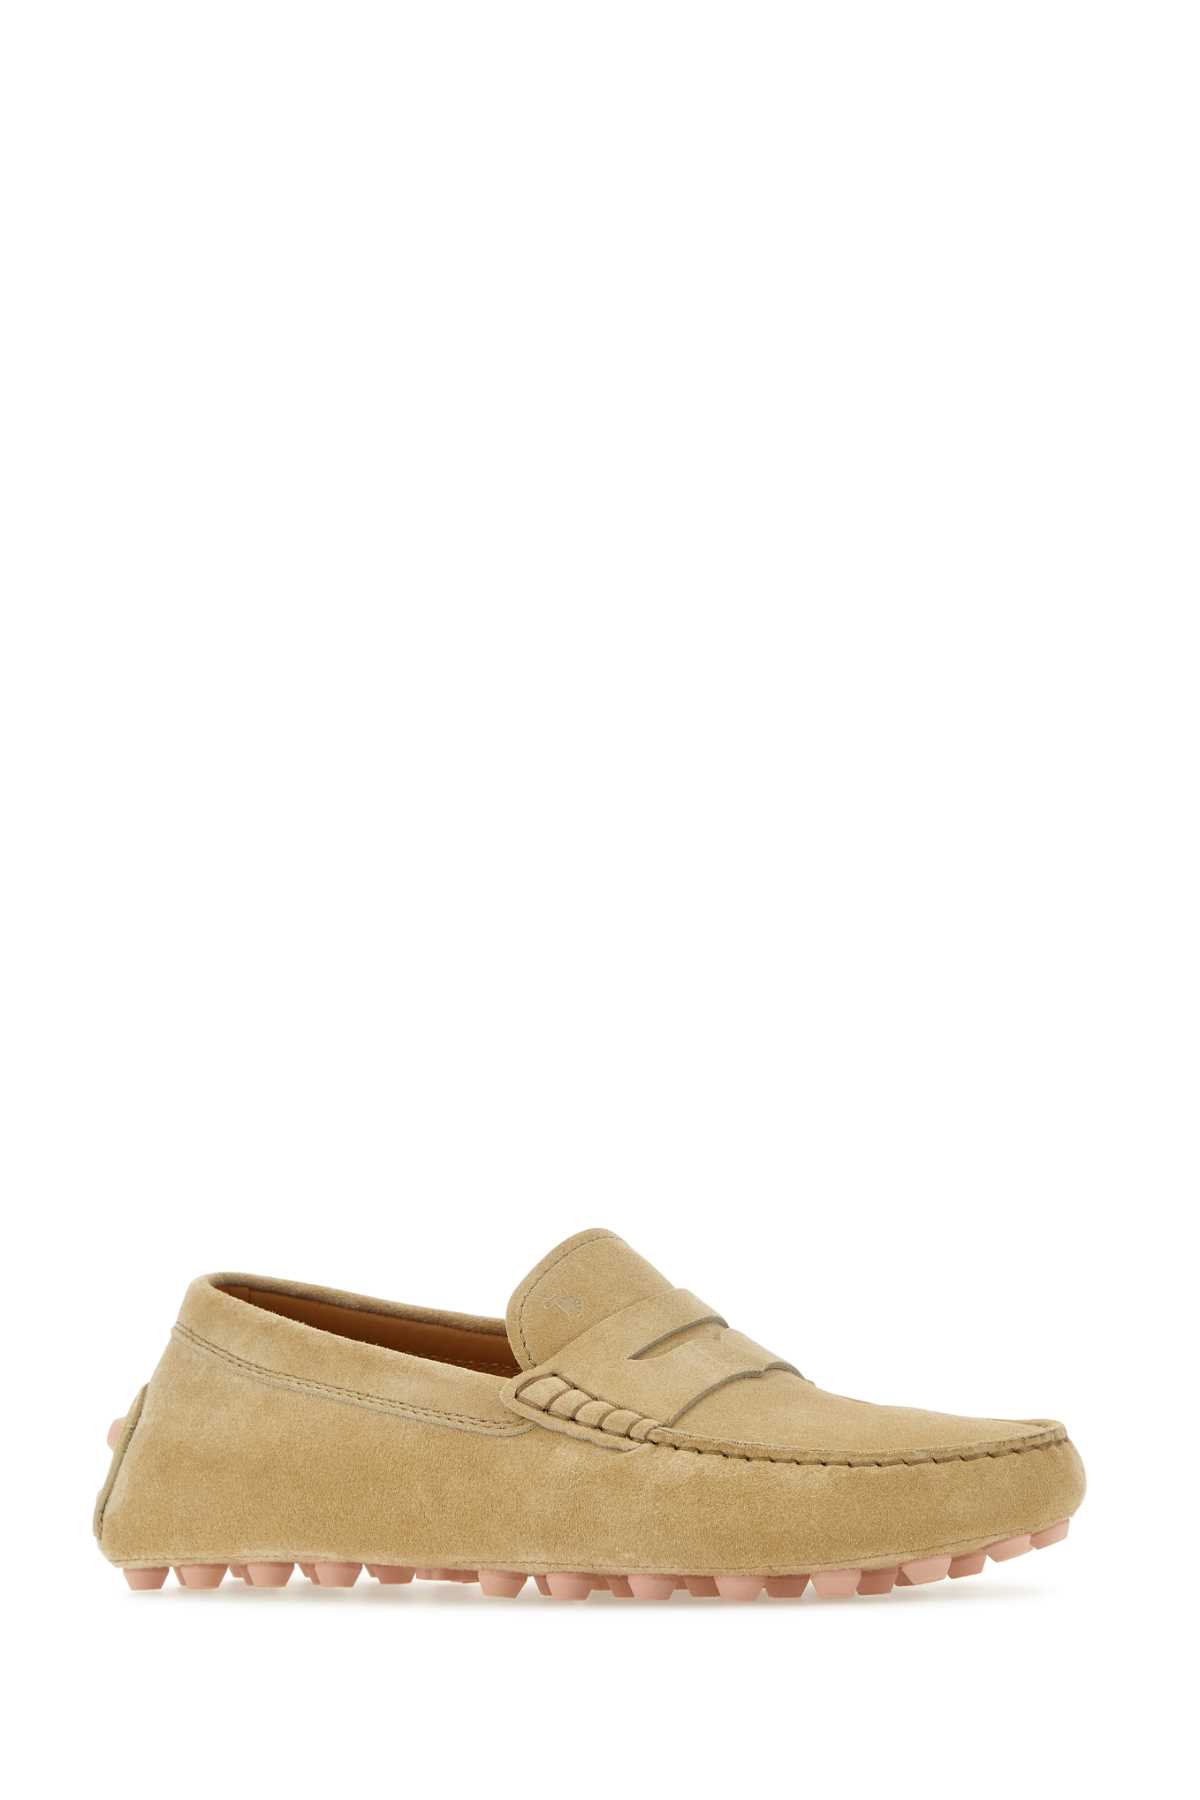 TOD'S BEIGE SUEDE LOAFERS